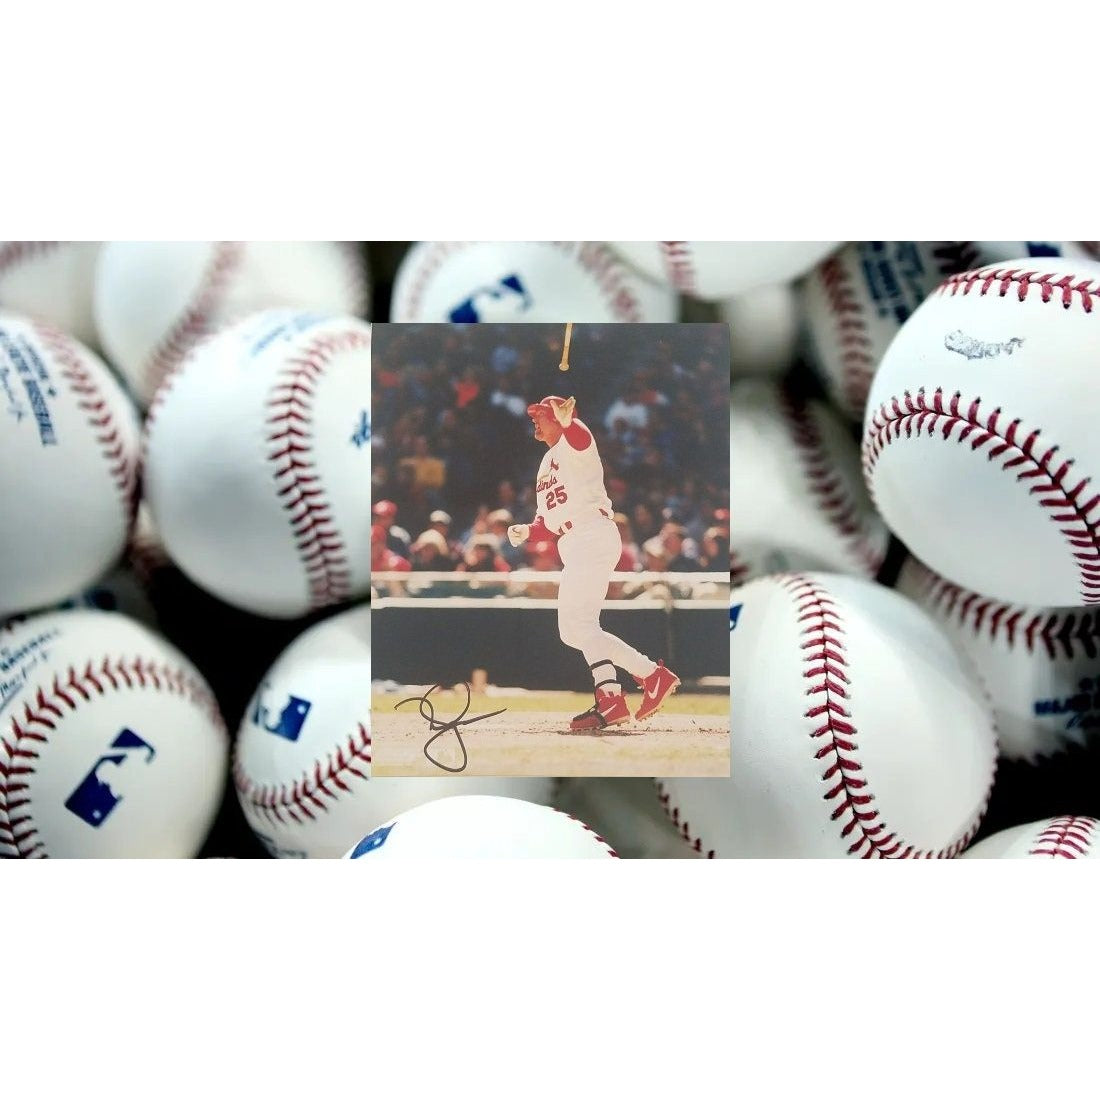 Mark McGwire St Louis Cardinals 8 x 10 signed photo